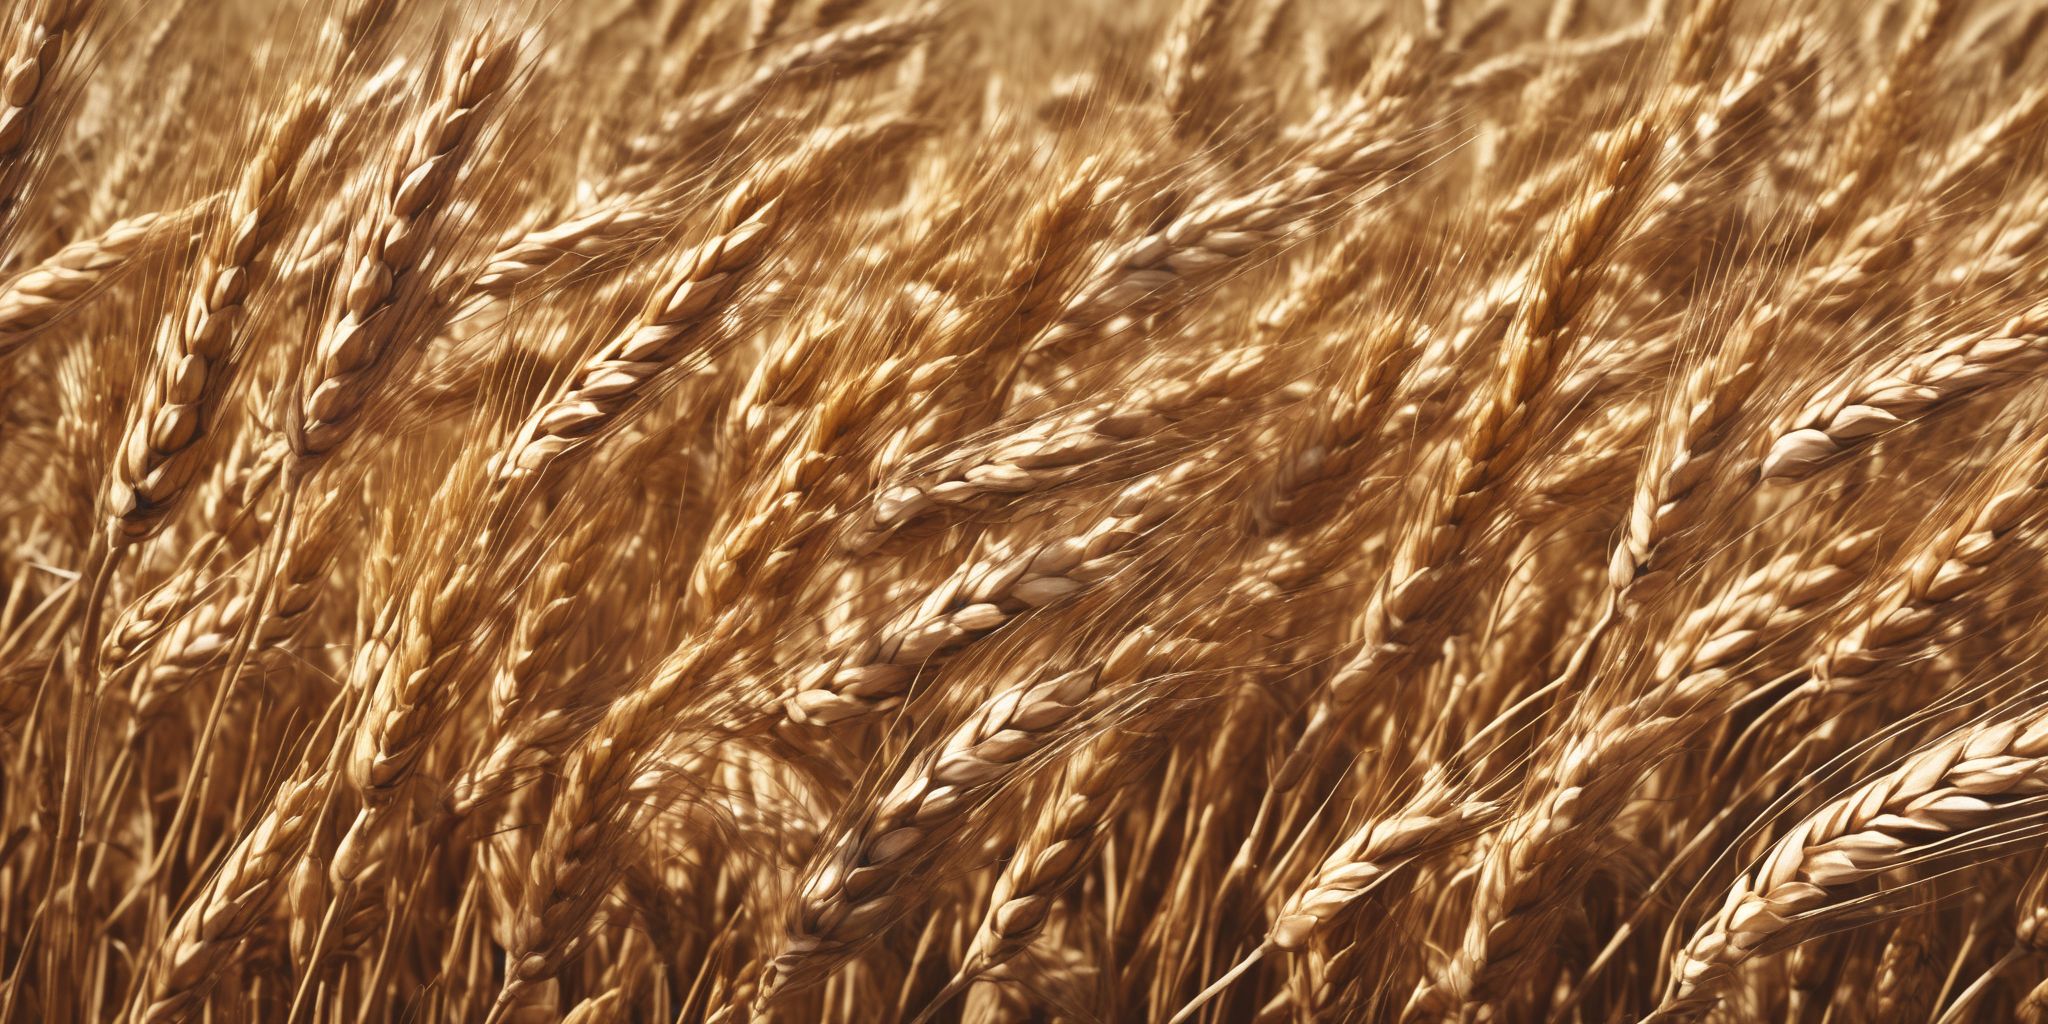 Wheat  in realistic, photographic style